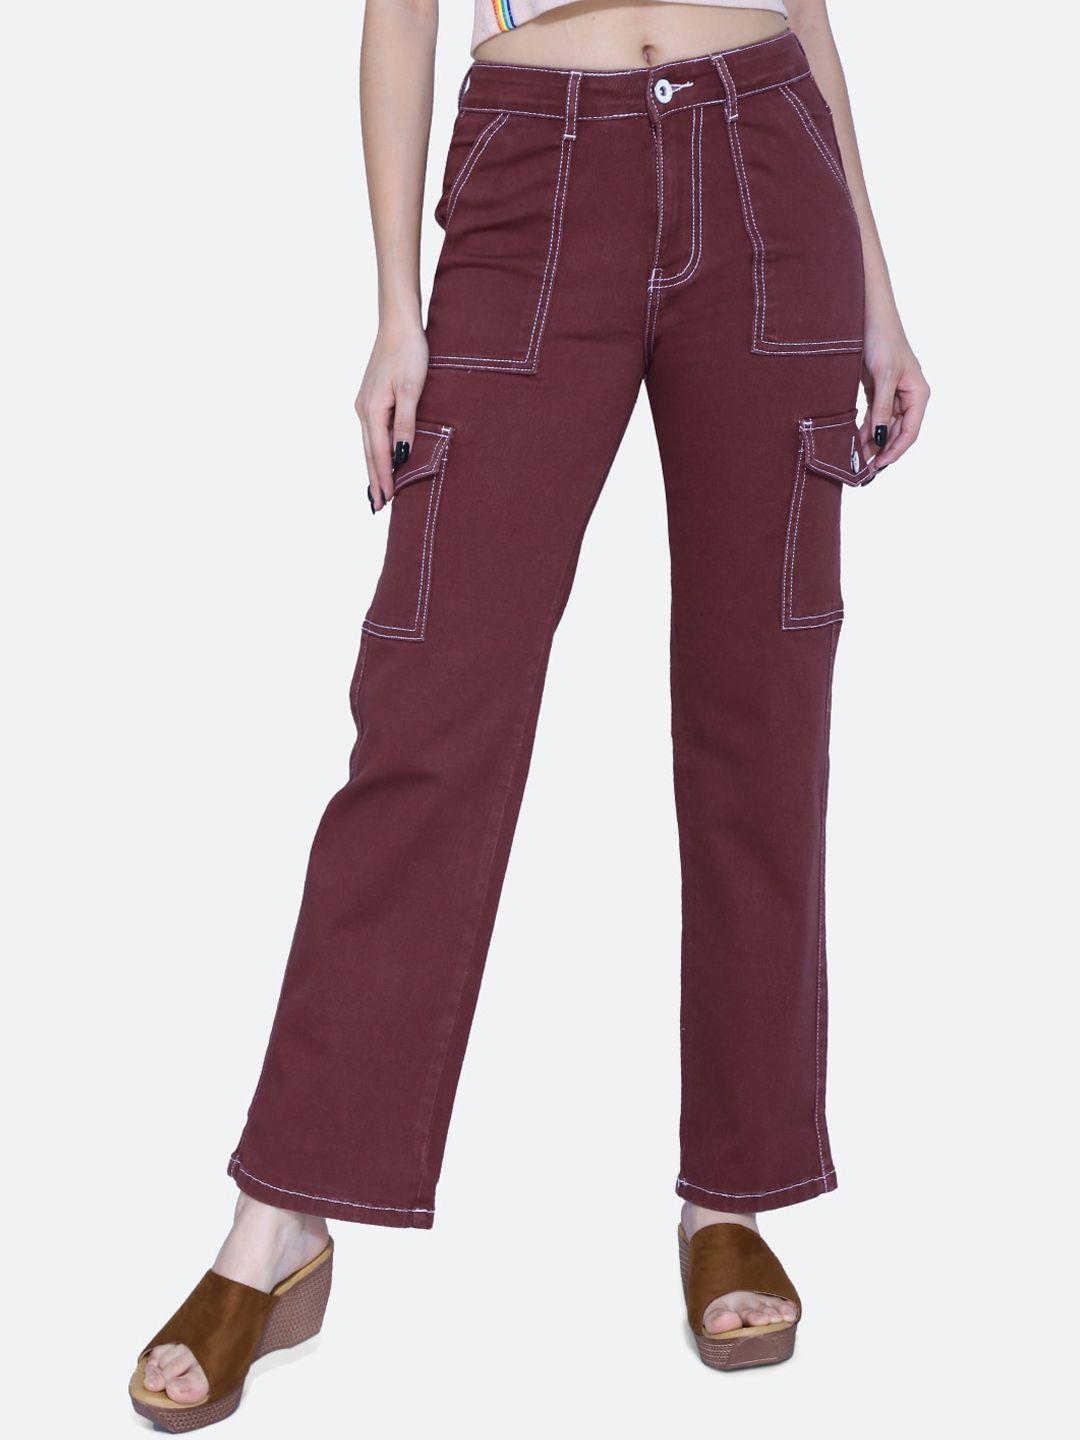 fck-3 women relaxed loose fit high-rise cargos trousers